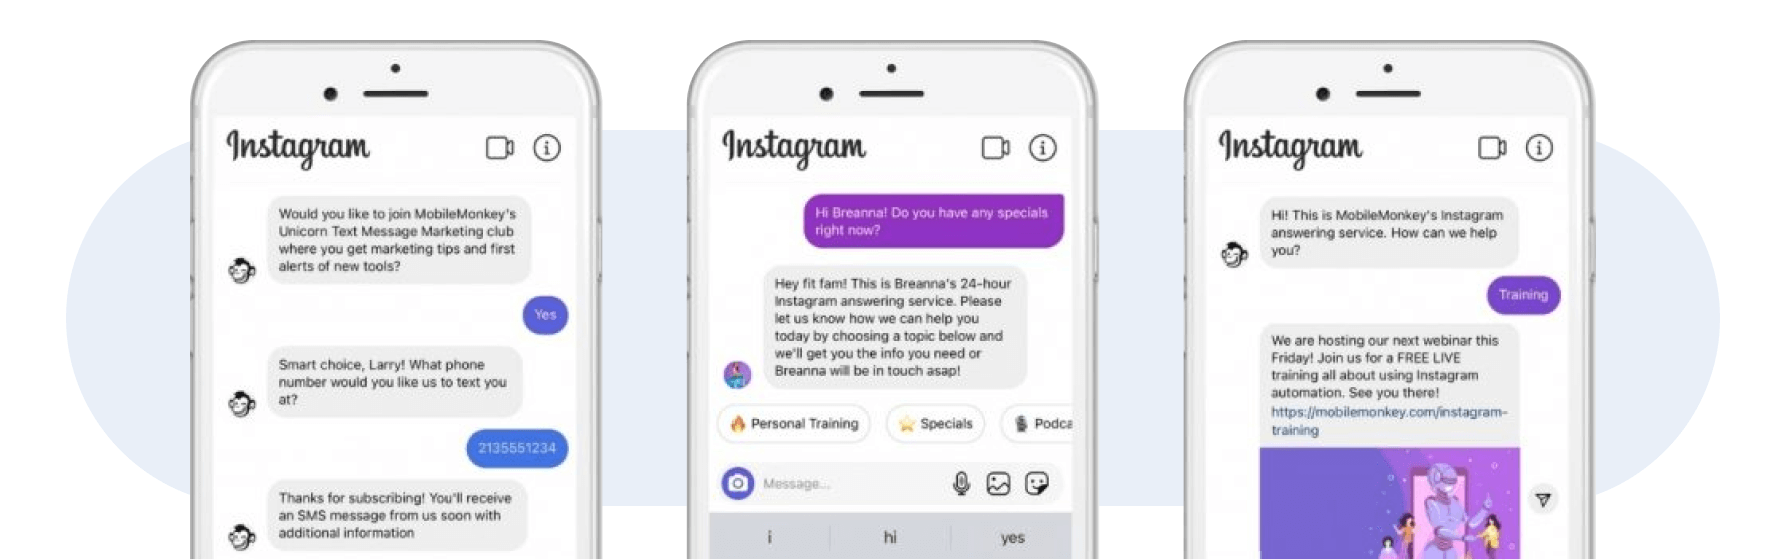 Instagram chat interface